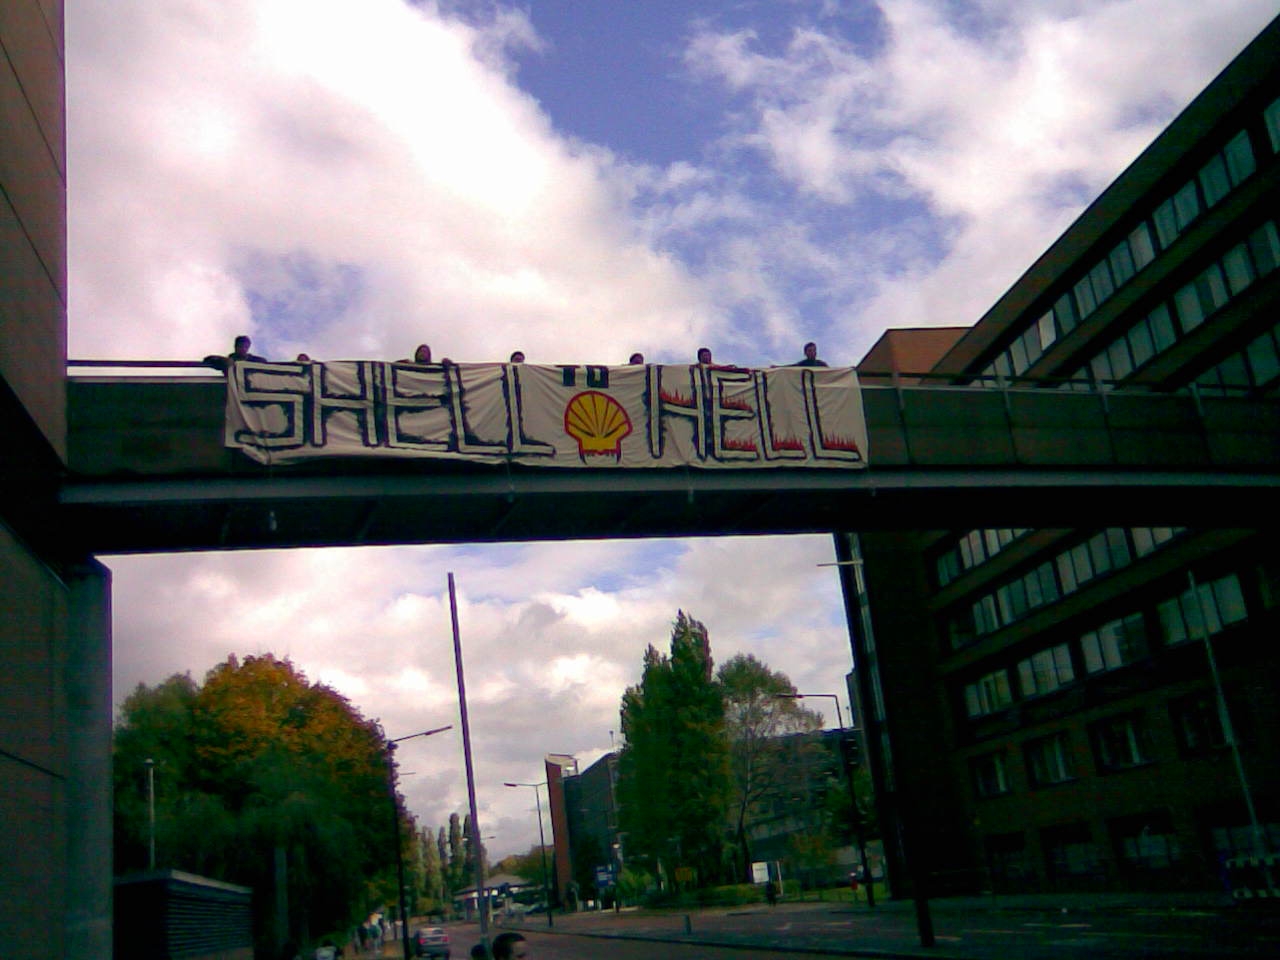 Shell to Hell Banner Drop